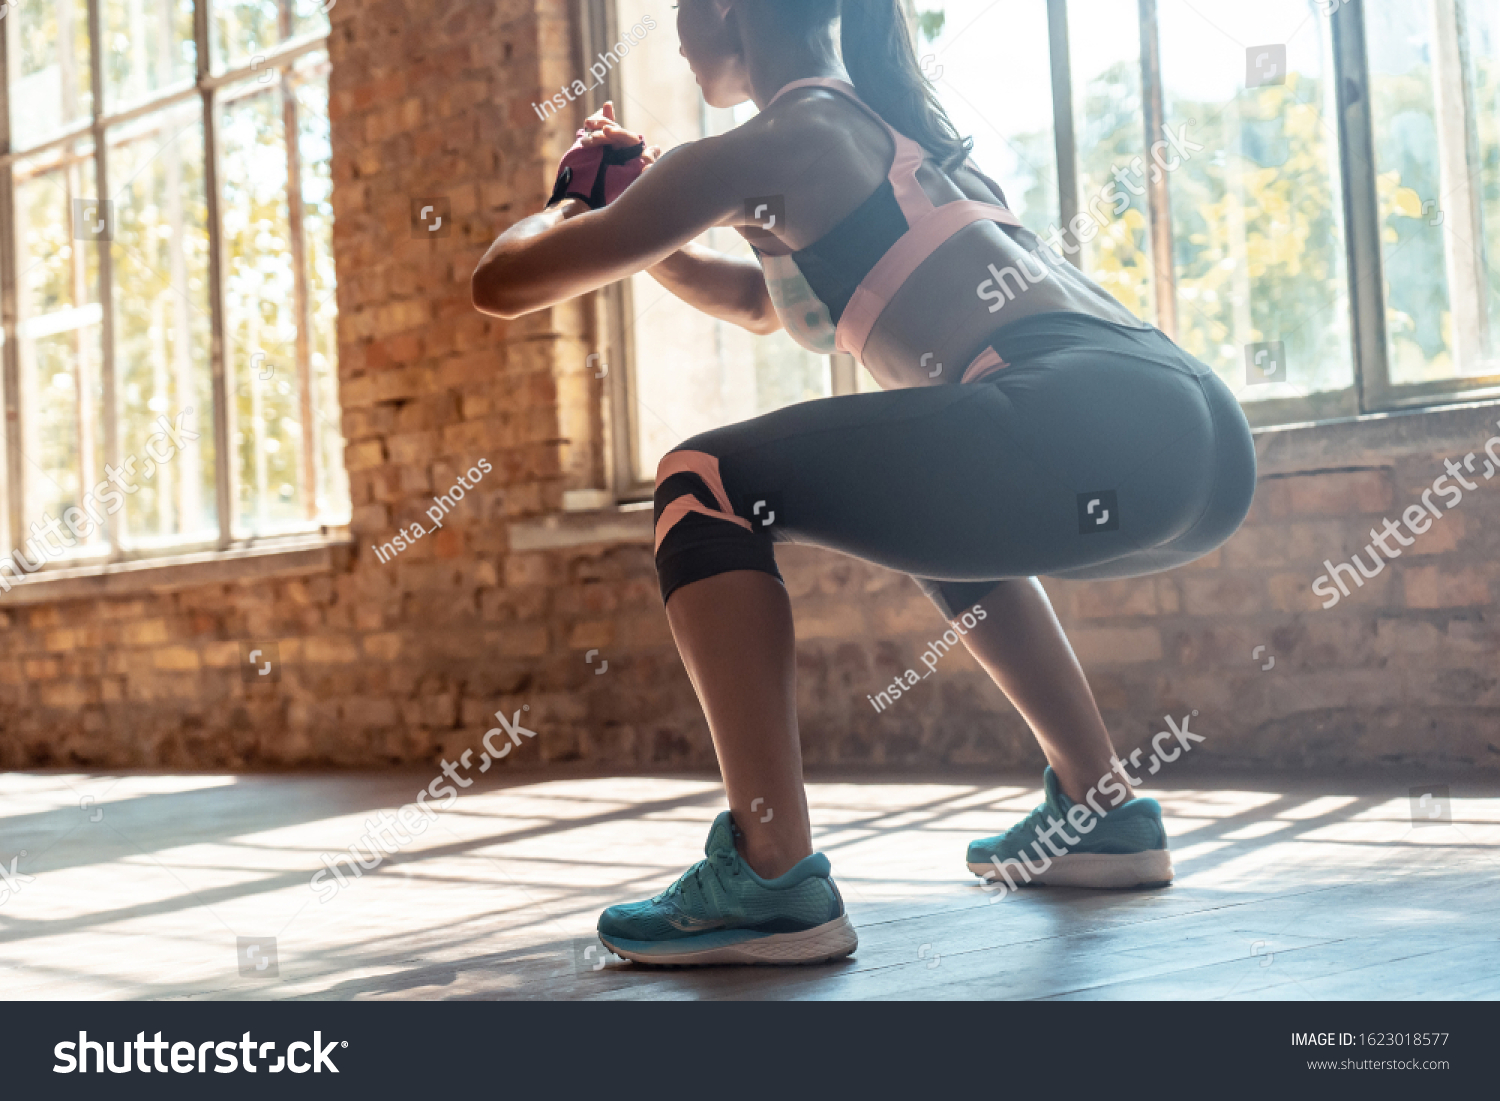 Young fit sporty active athlete woman wear sportswear crouching doing squats session fitness training legs buttocks muscles workout exercise in modern sunny gym space indoors, rear back close up view #1623018577